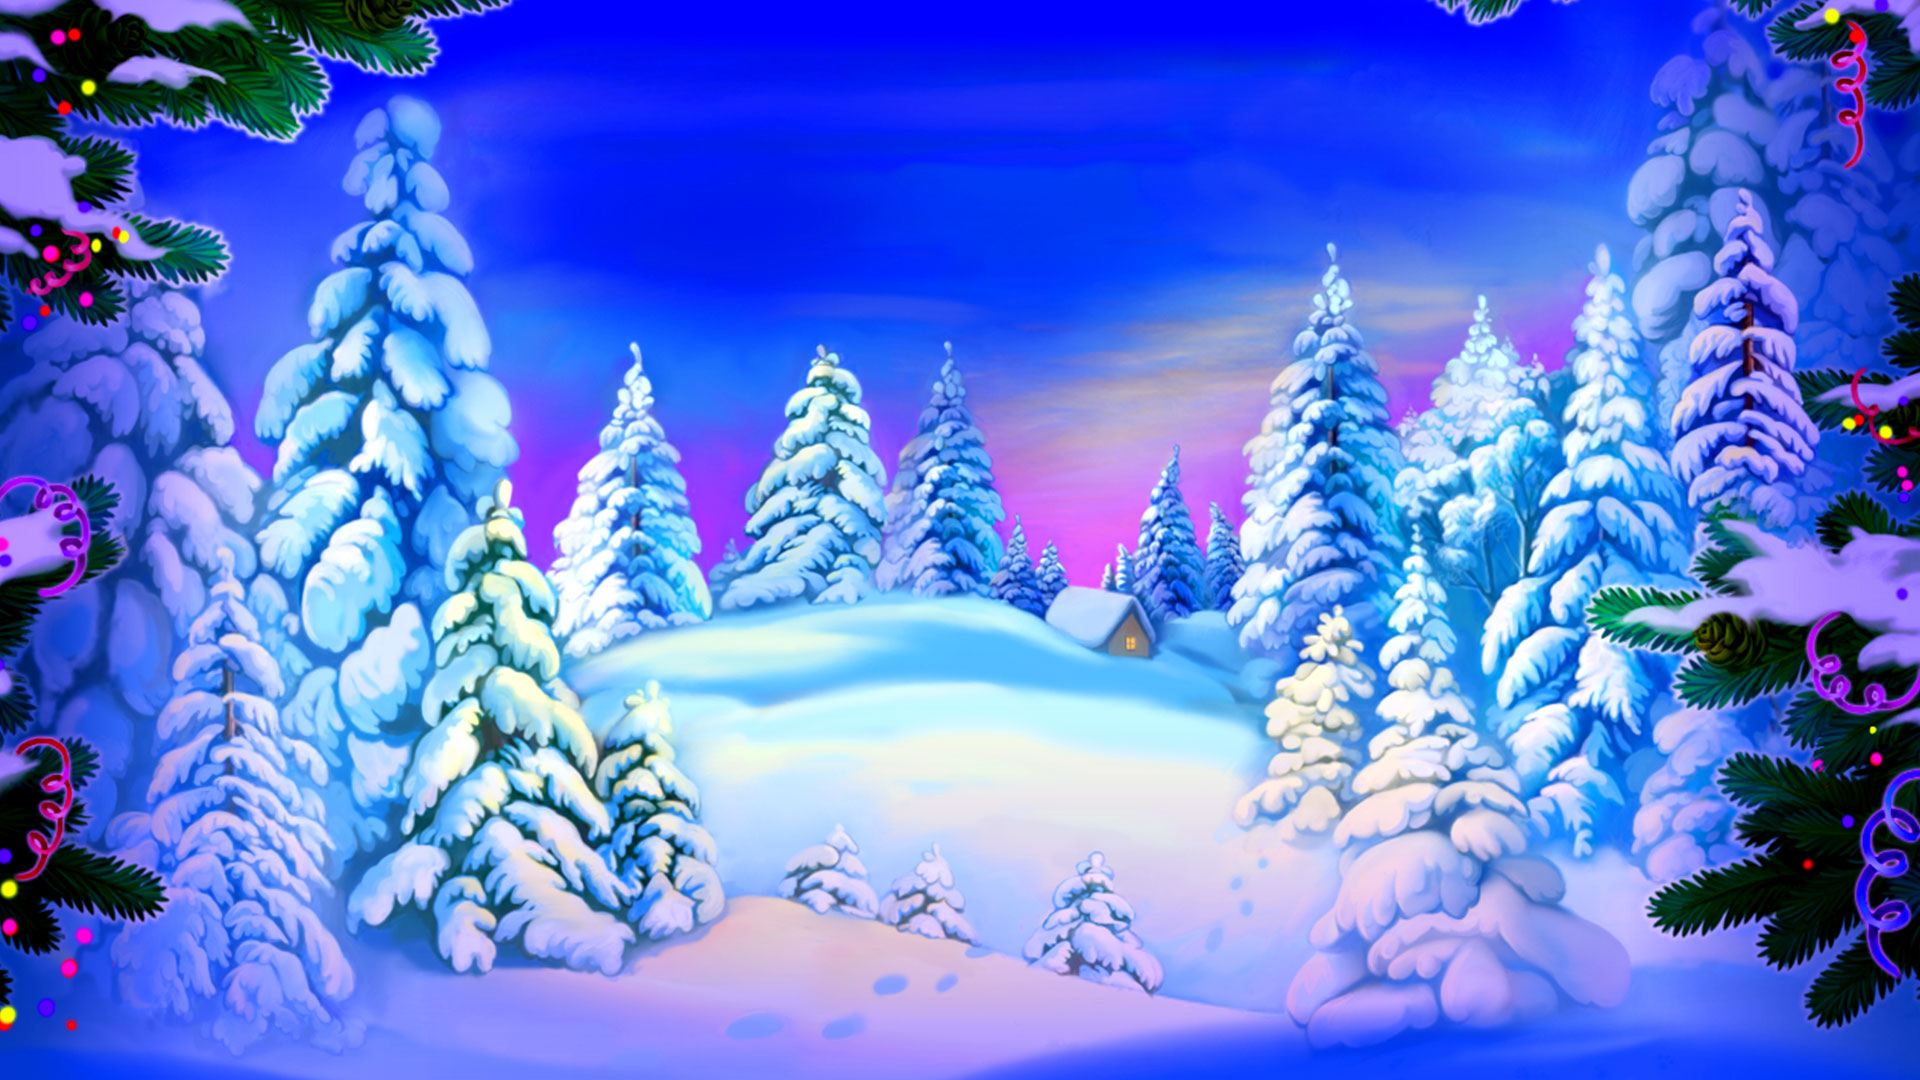 Game hight resolution background Merry Christmas